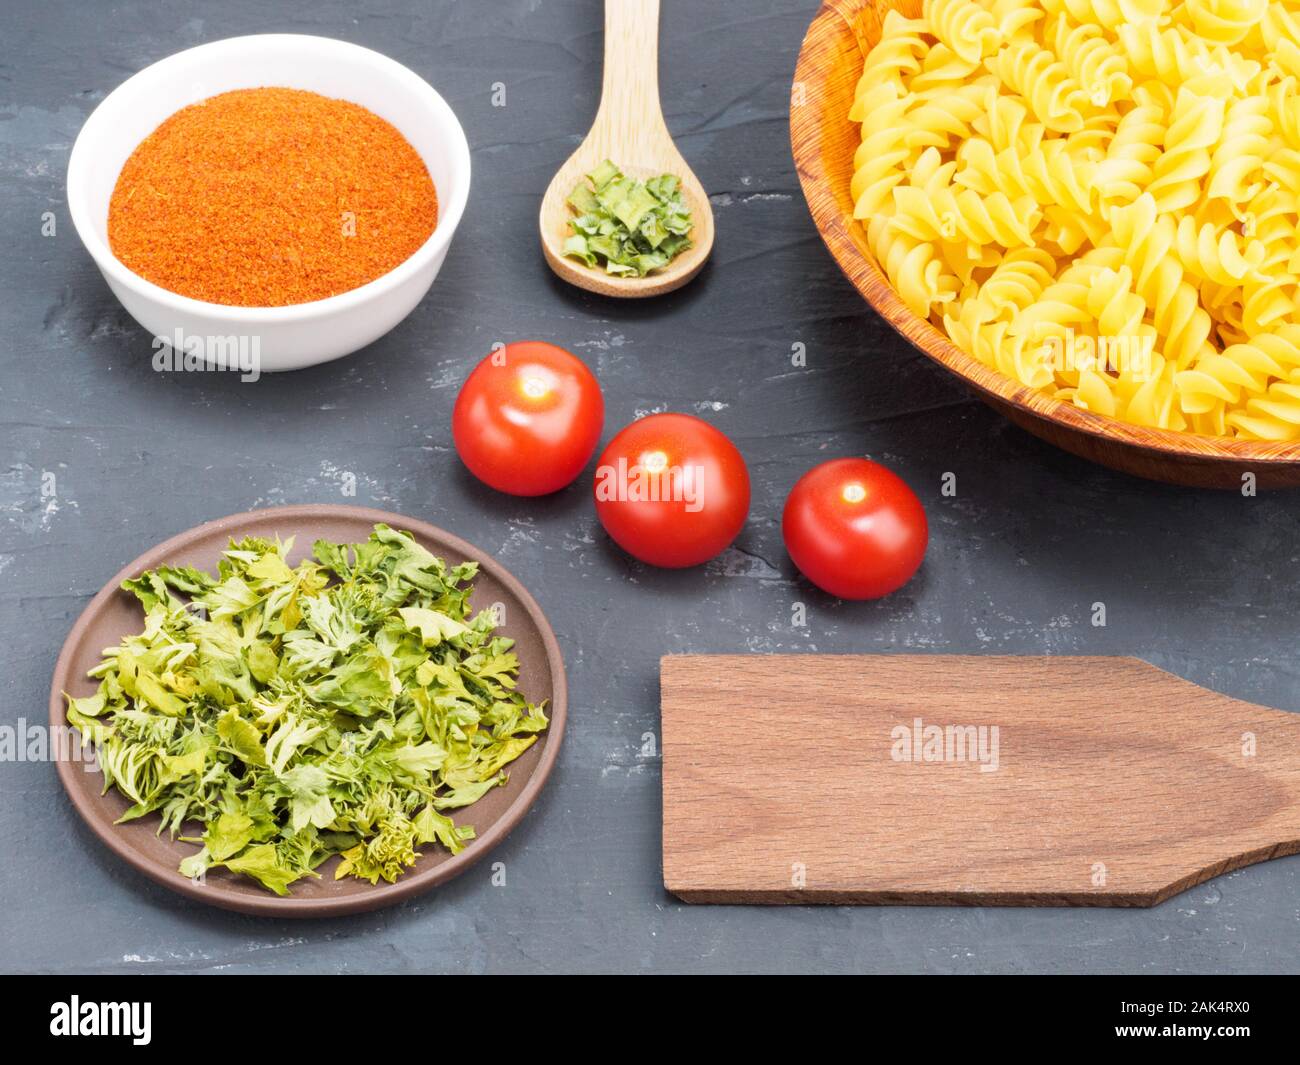 Pasta in wooden bowl, small tomatoes, red chili, green grass on a black concrete background. Healthy eating concept Stock Photo